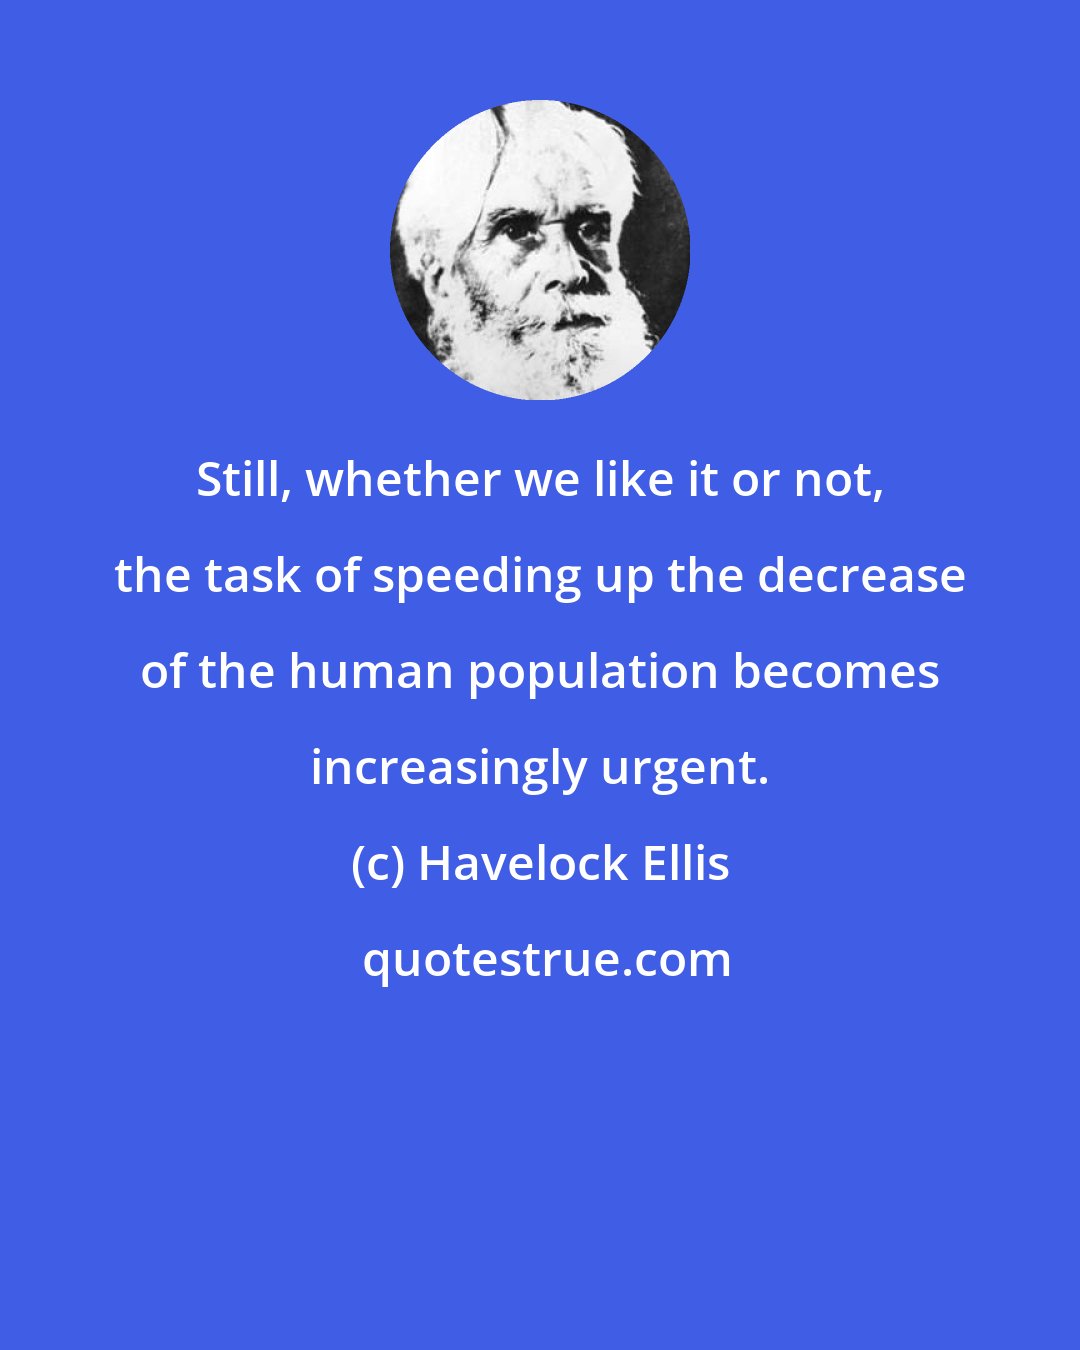 Havelock Ellis: Still, whether we like it or not, the task of speeding up the decrease of the human population becomes increasingly urgent.